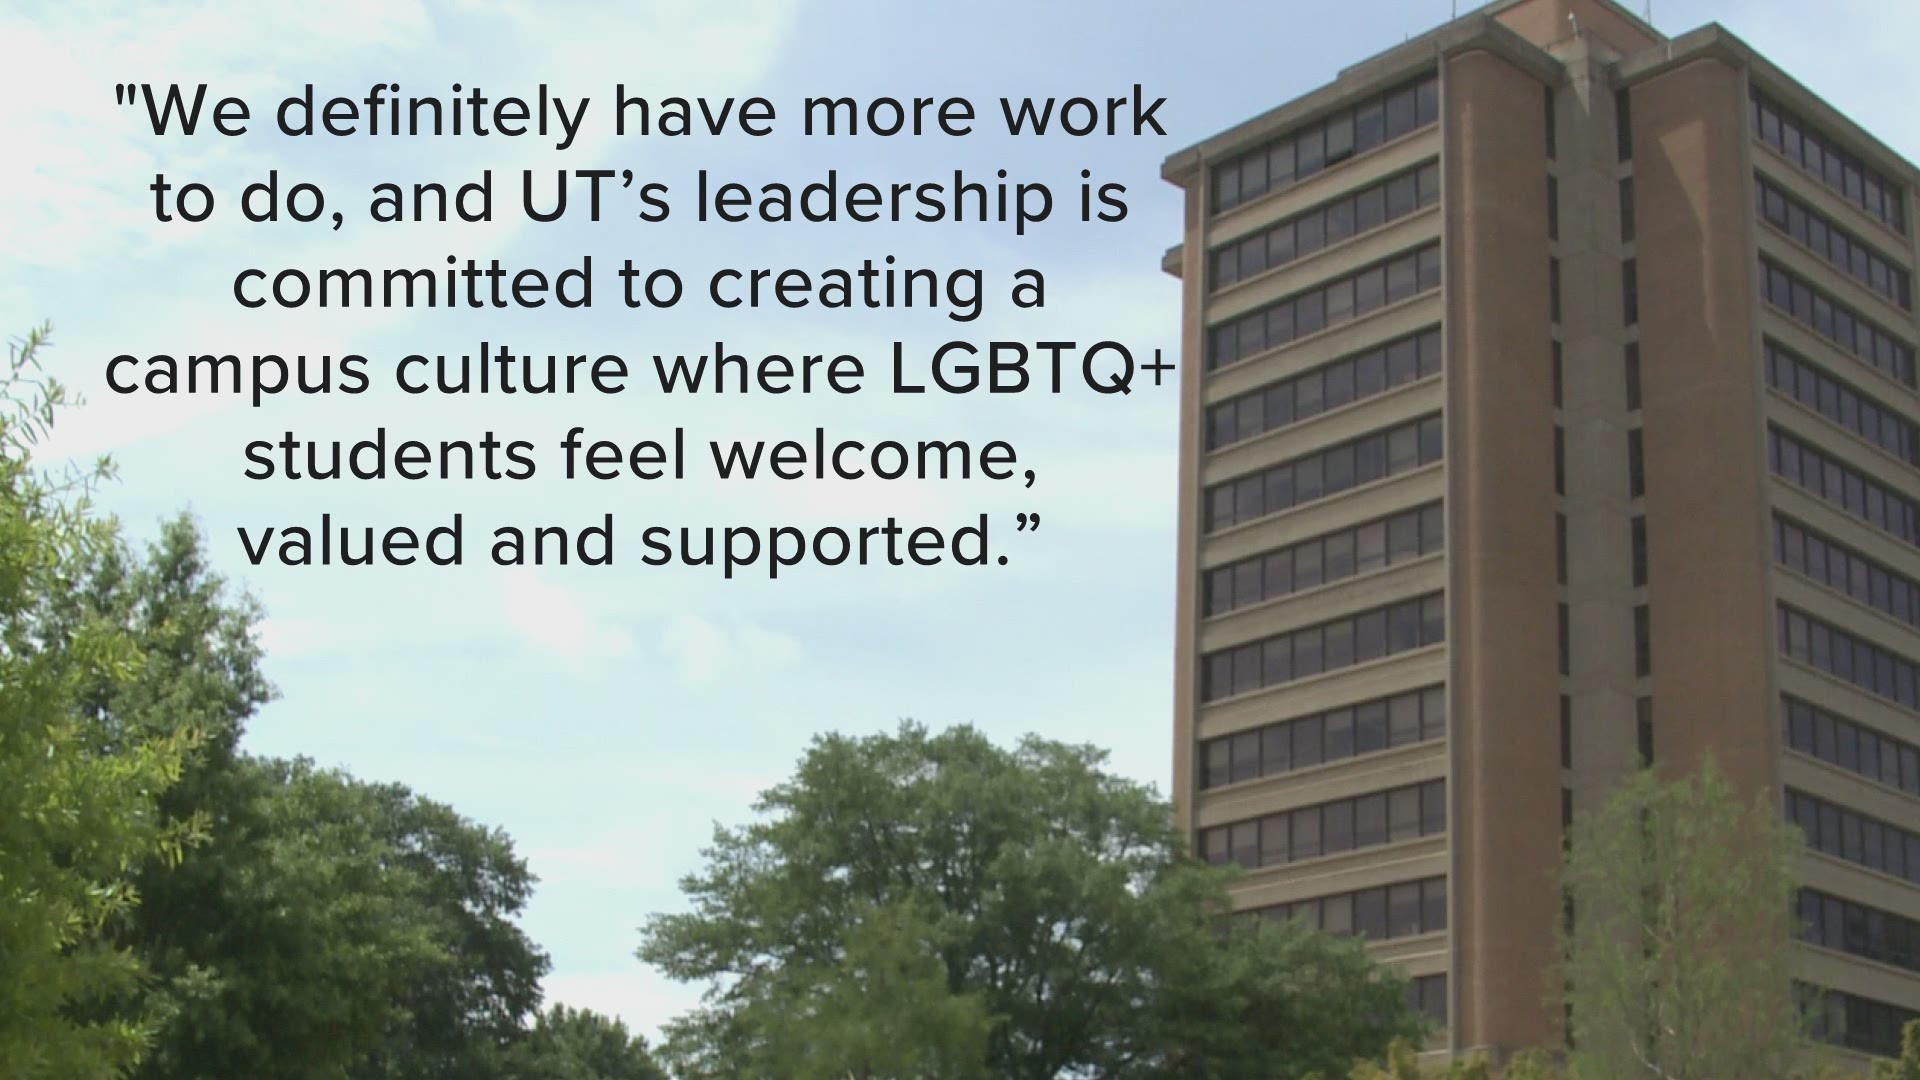 According to the Princeton Review, the University of Tennessee one of the most unfriendly colleges in the nation towards LGBTQ students.